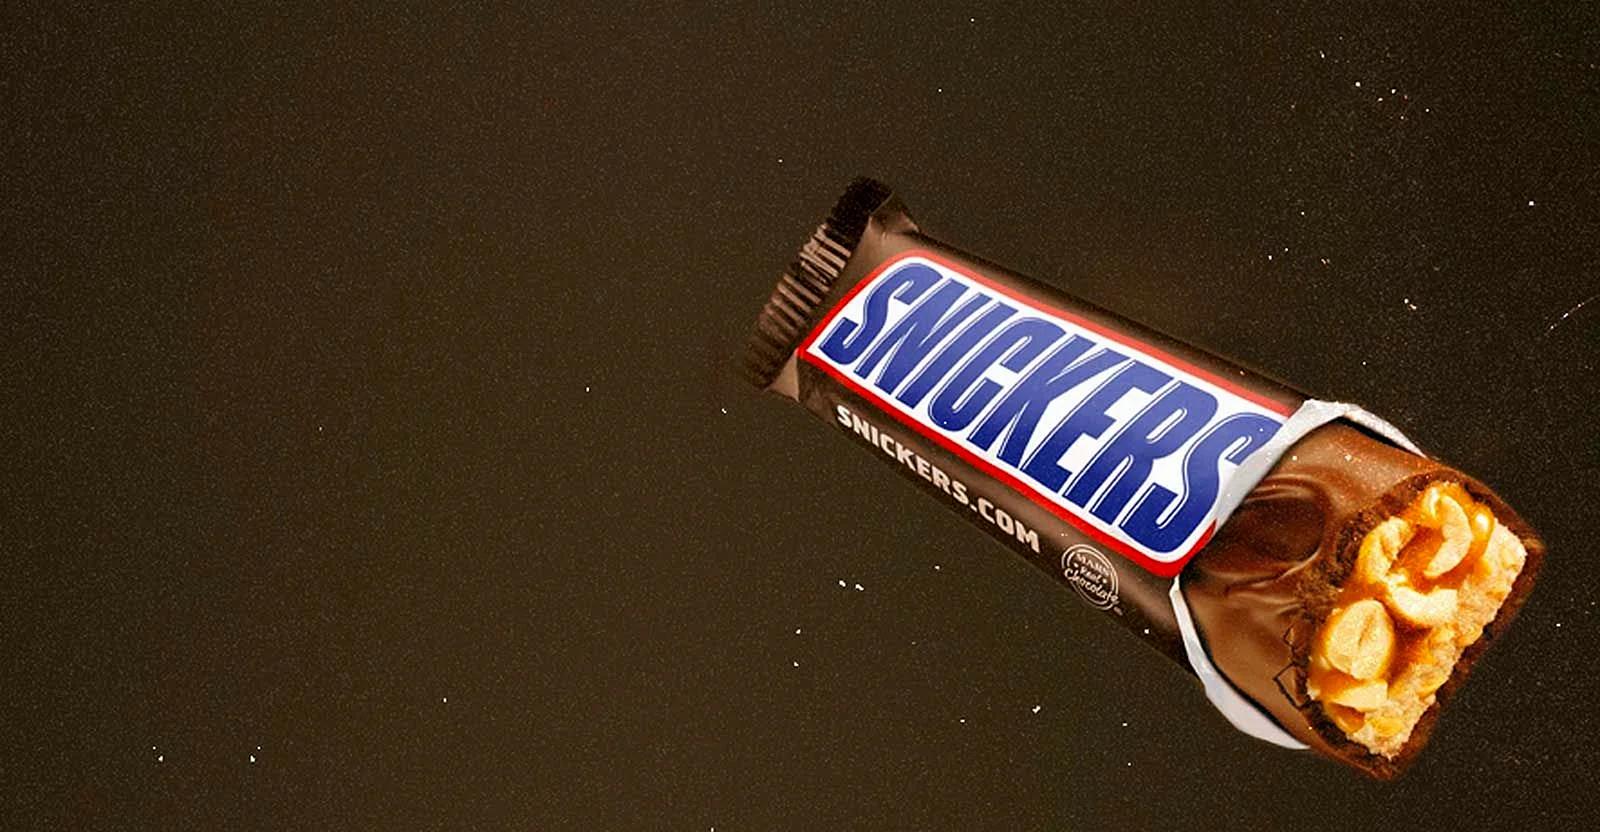 Snickers Ads Wallpaper